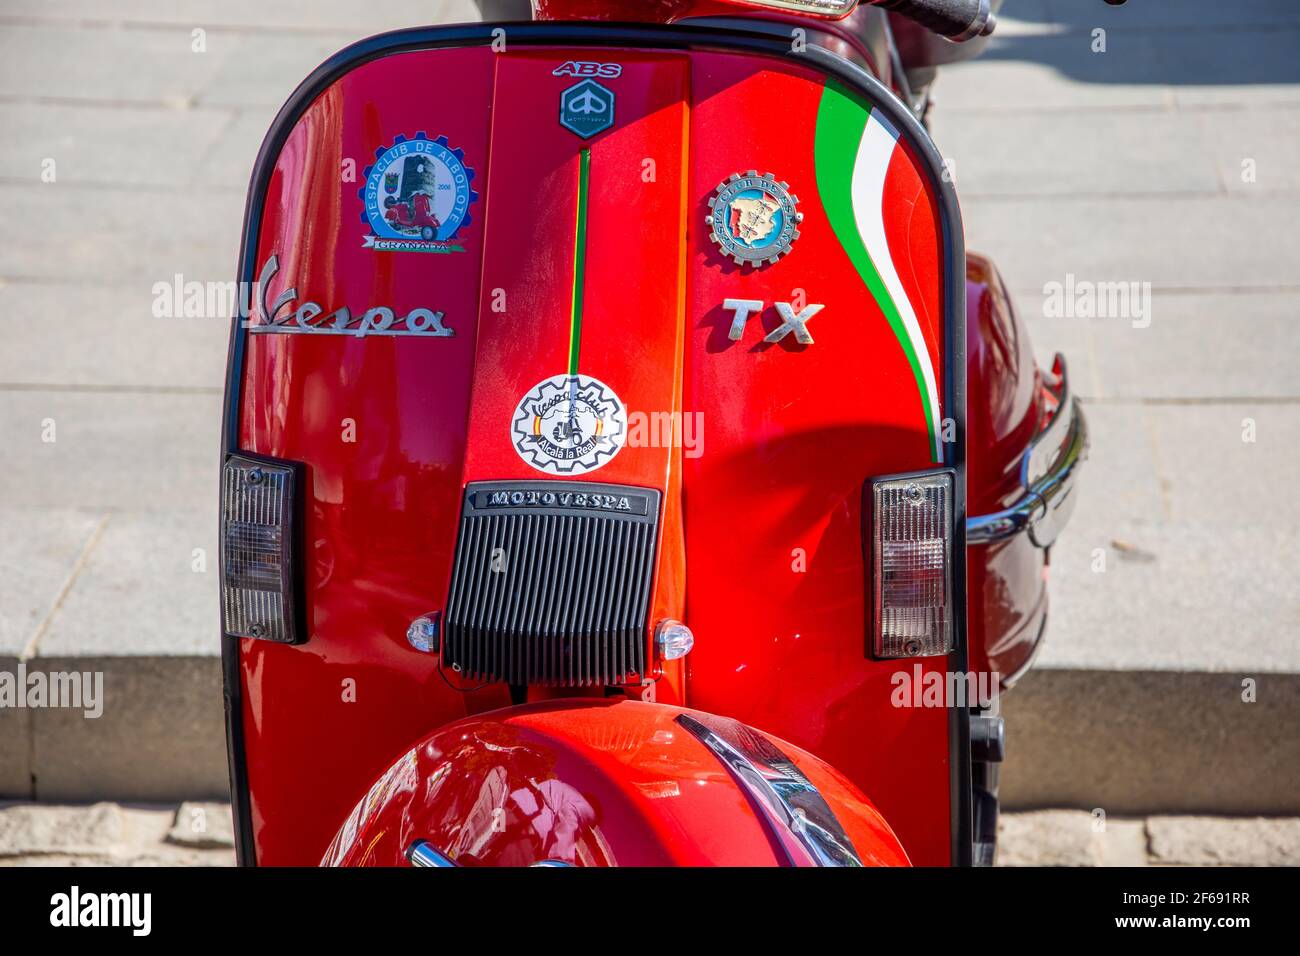 Granada, Spain; September-29, 2019: Details of classic motorcycles, some of them customized, in a street exhibition in Granada (Spain) Stock Photo